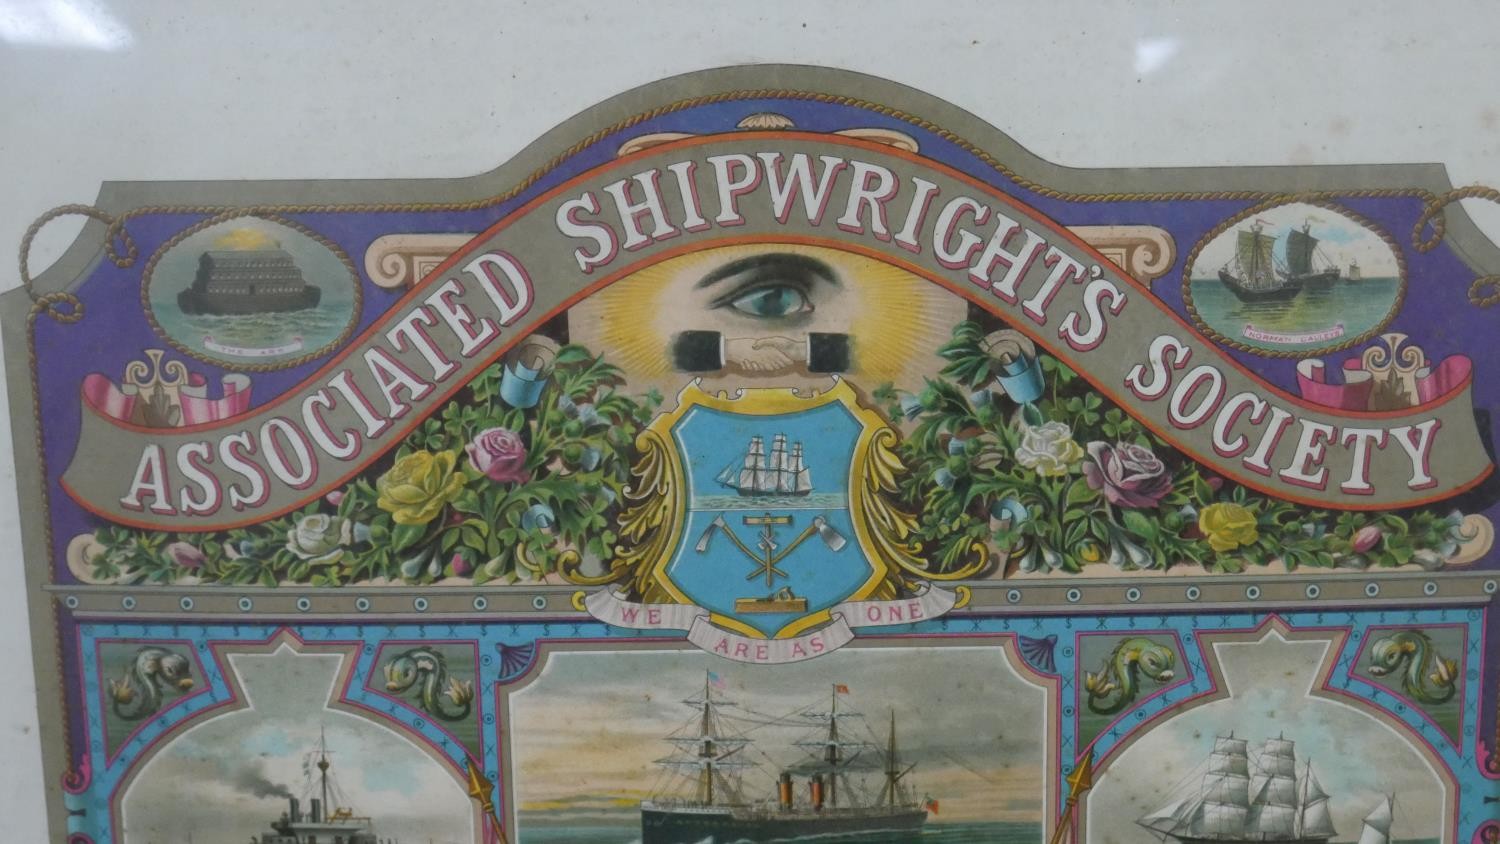 A late Victorian Associated Shipwrights Society certificate, awarded to Benjamin Newson by the - Image 4 of 7